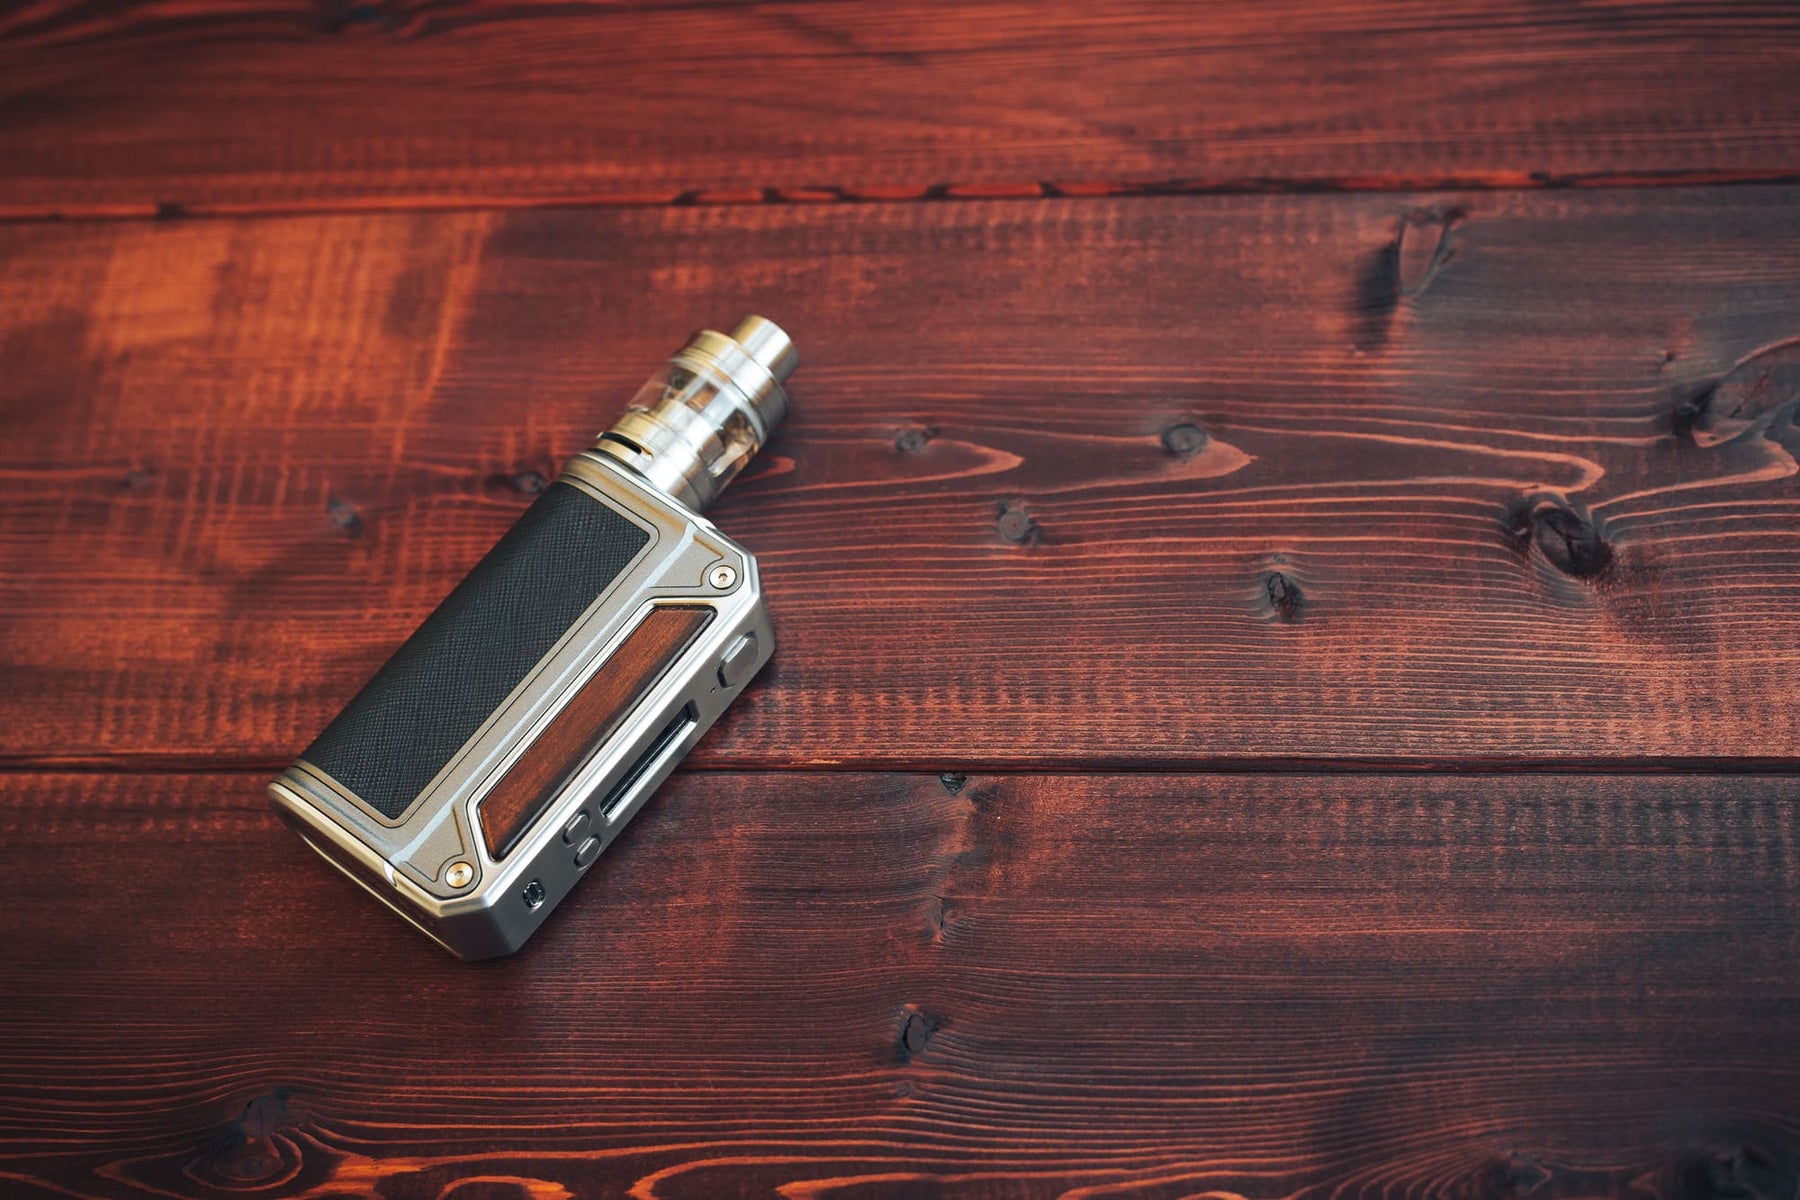 Cloud Chasing for Creatives: 5 Homemade Vape Mods You'll Love